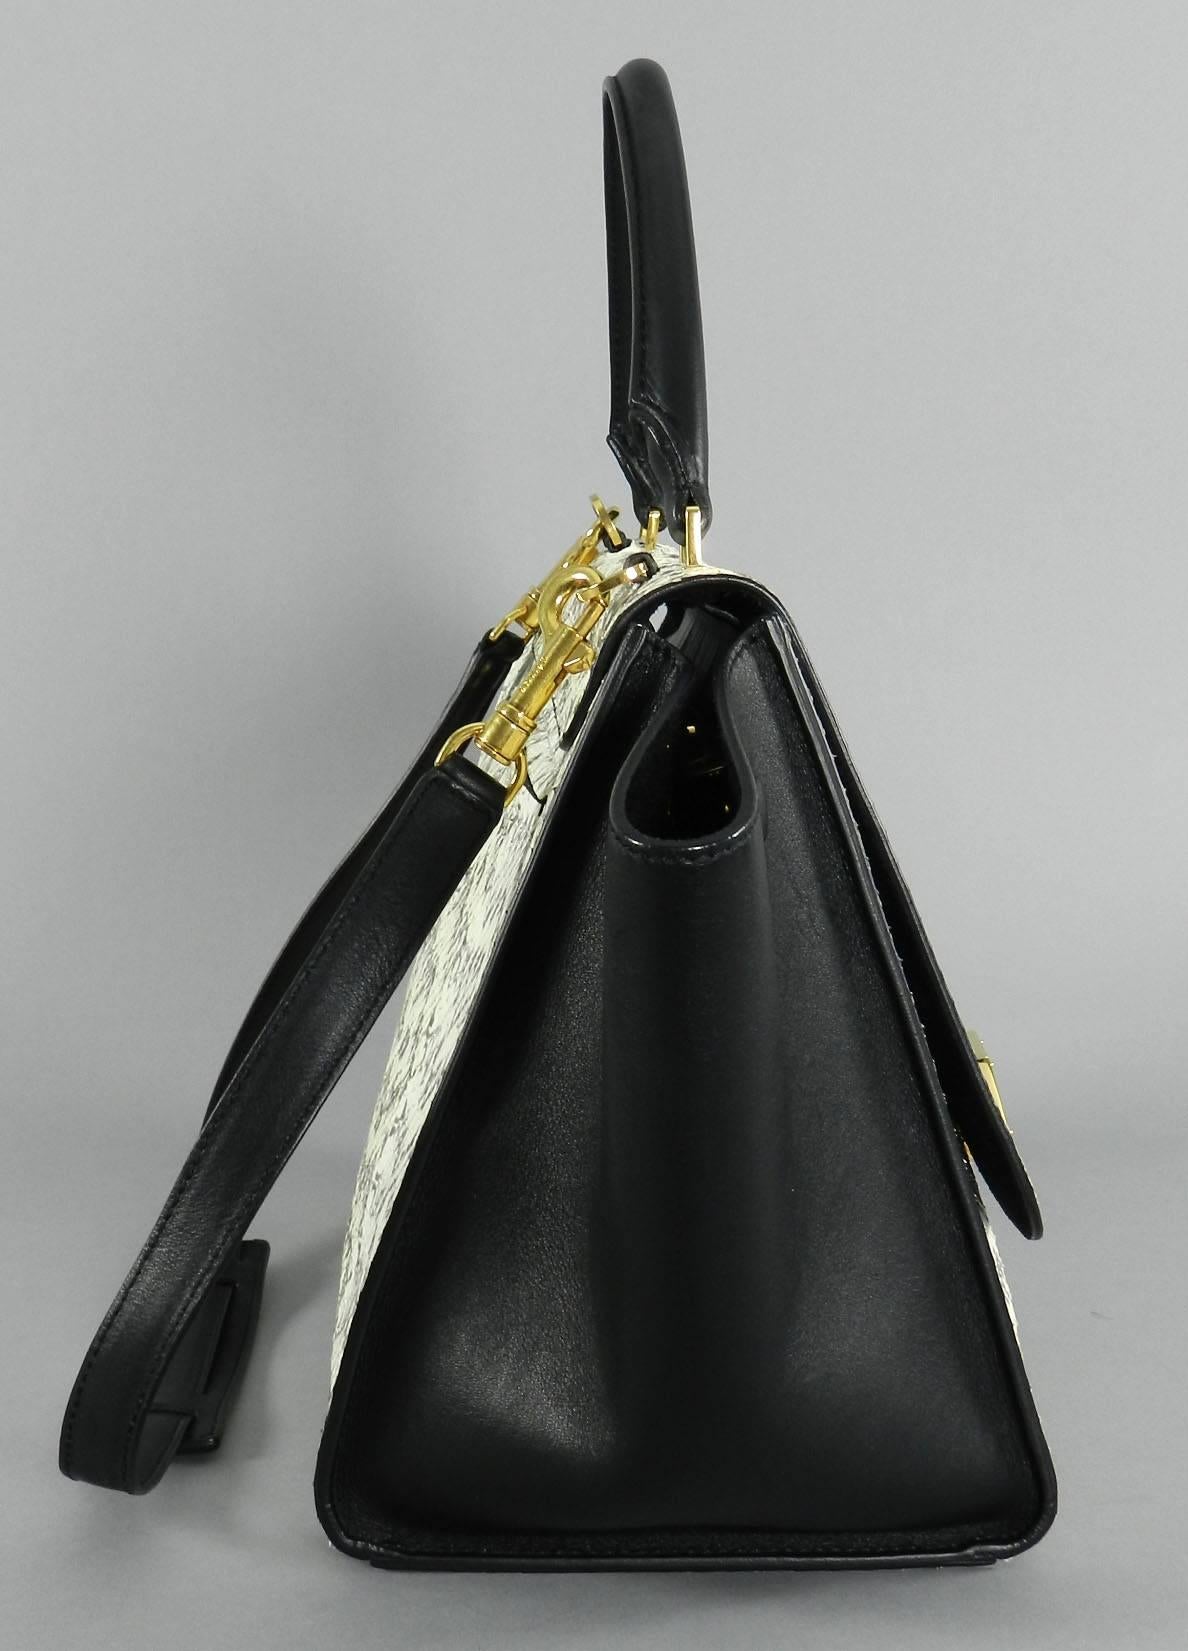 Celine trapeze bag in python snakeskin and black leather. Excellent pre-owned condition. Main body of bag measures 12 x 9 x 7